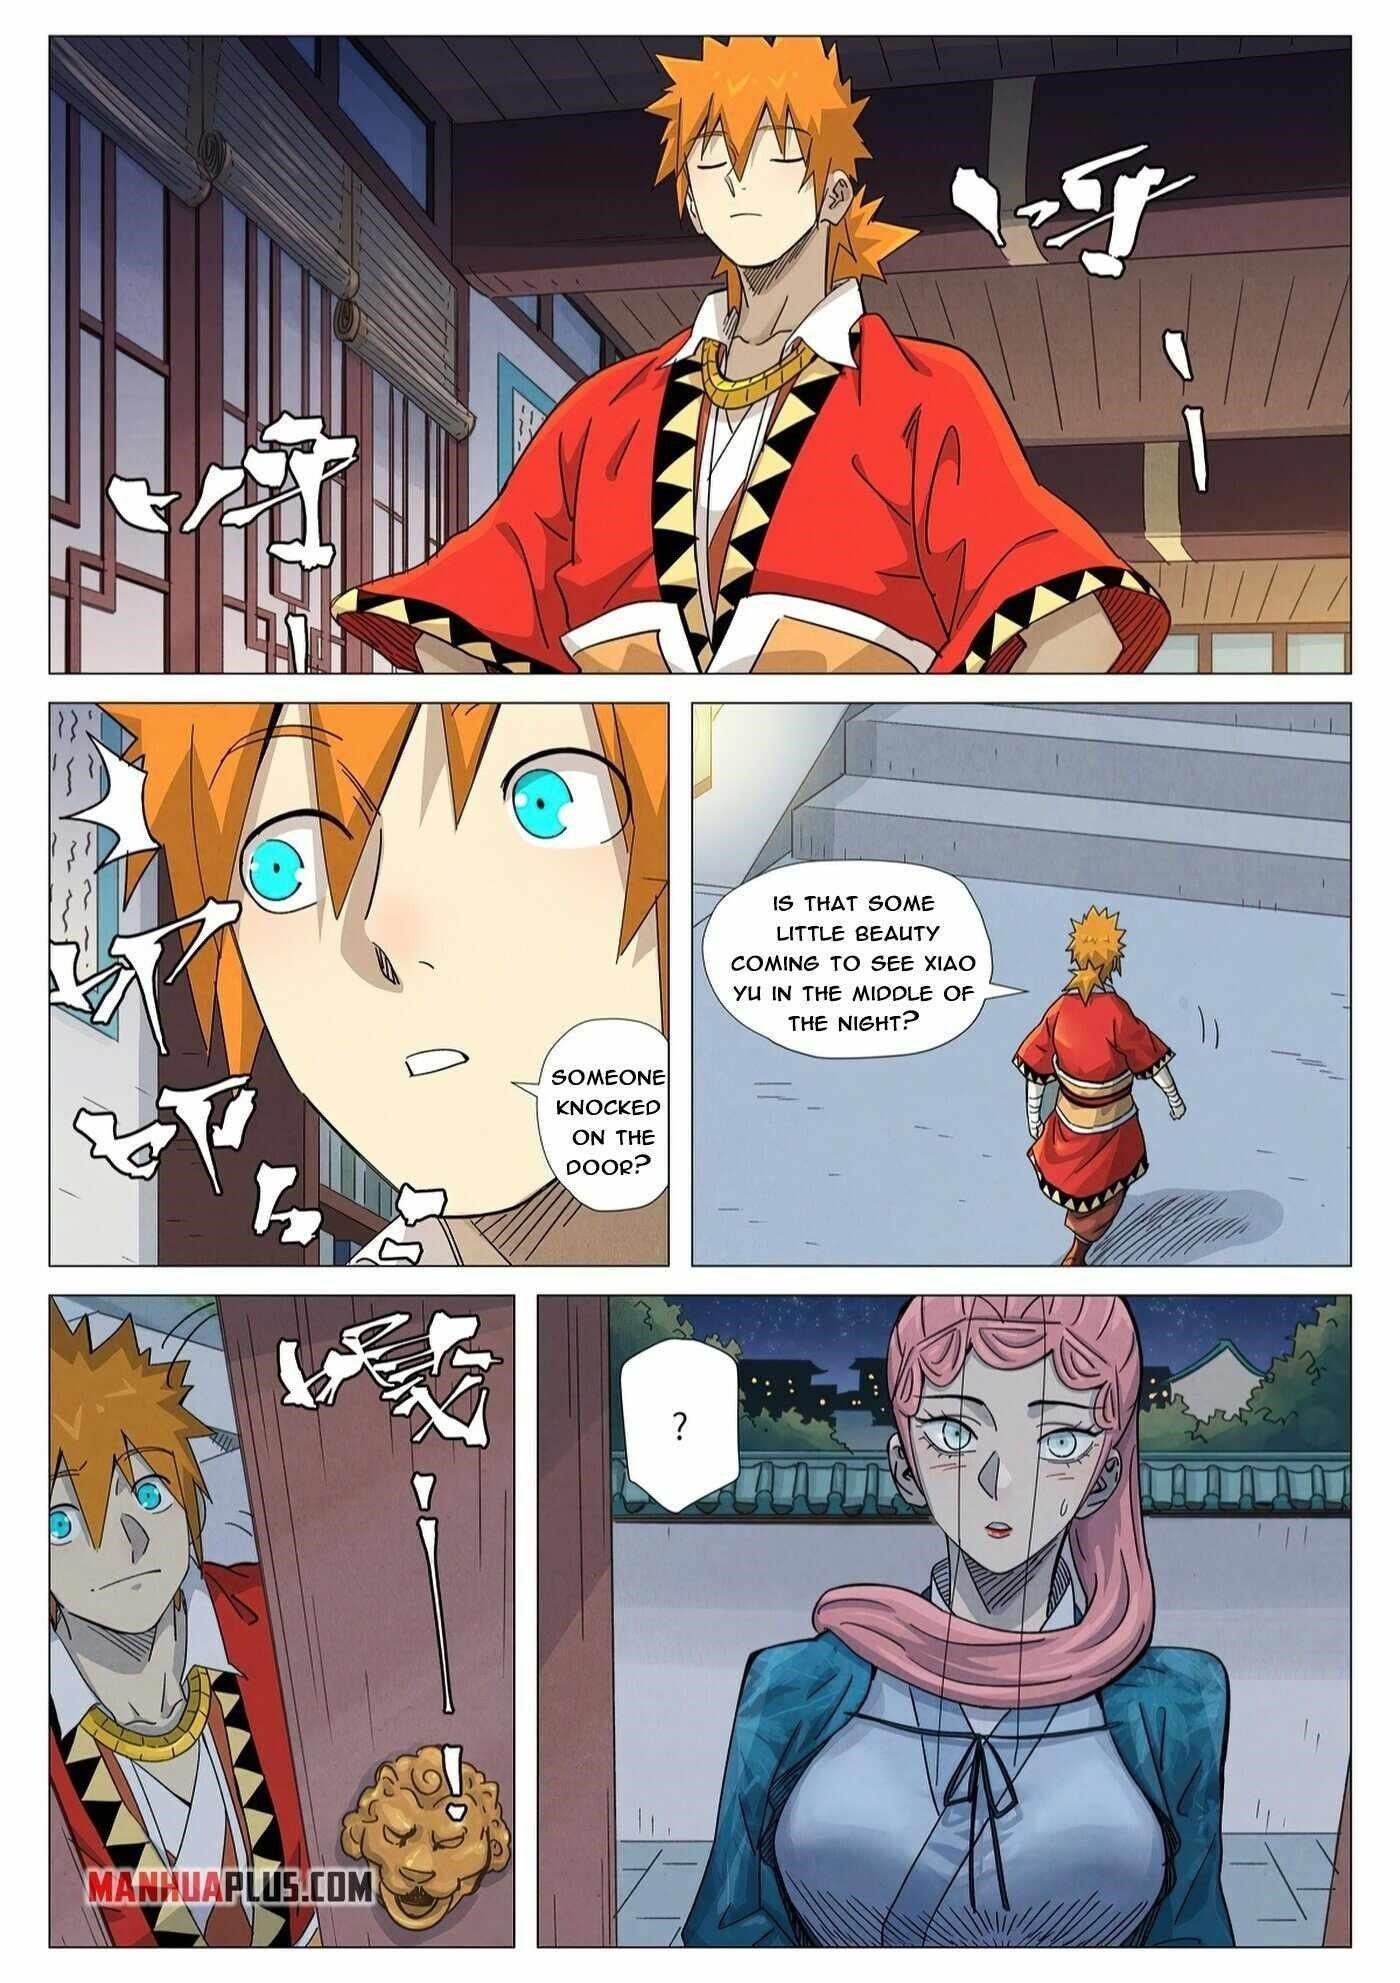 Tales of Demons and Gods chapter 360.1 page 6